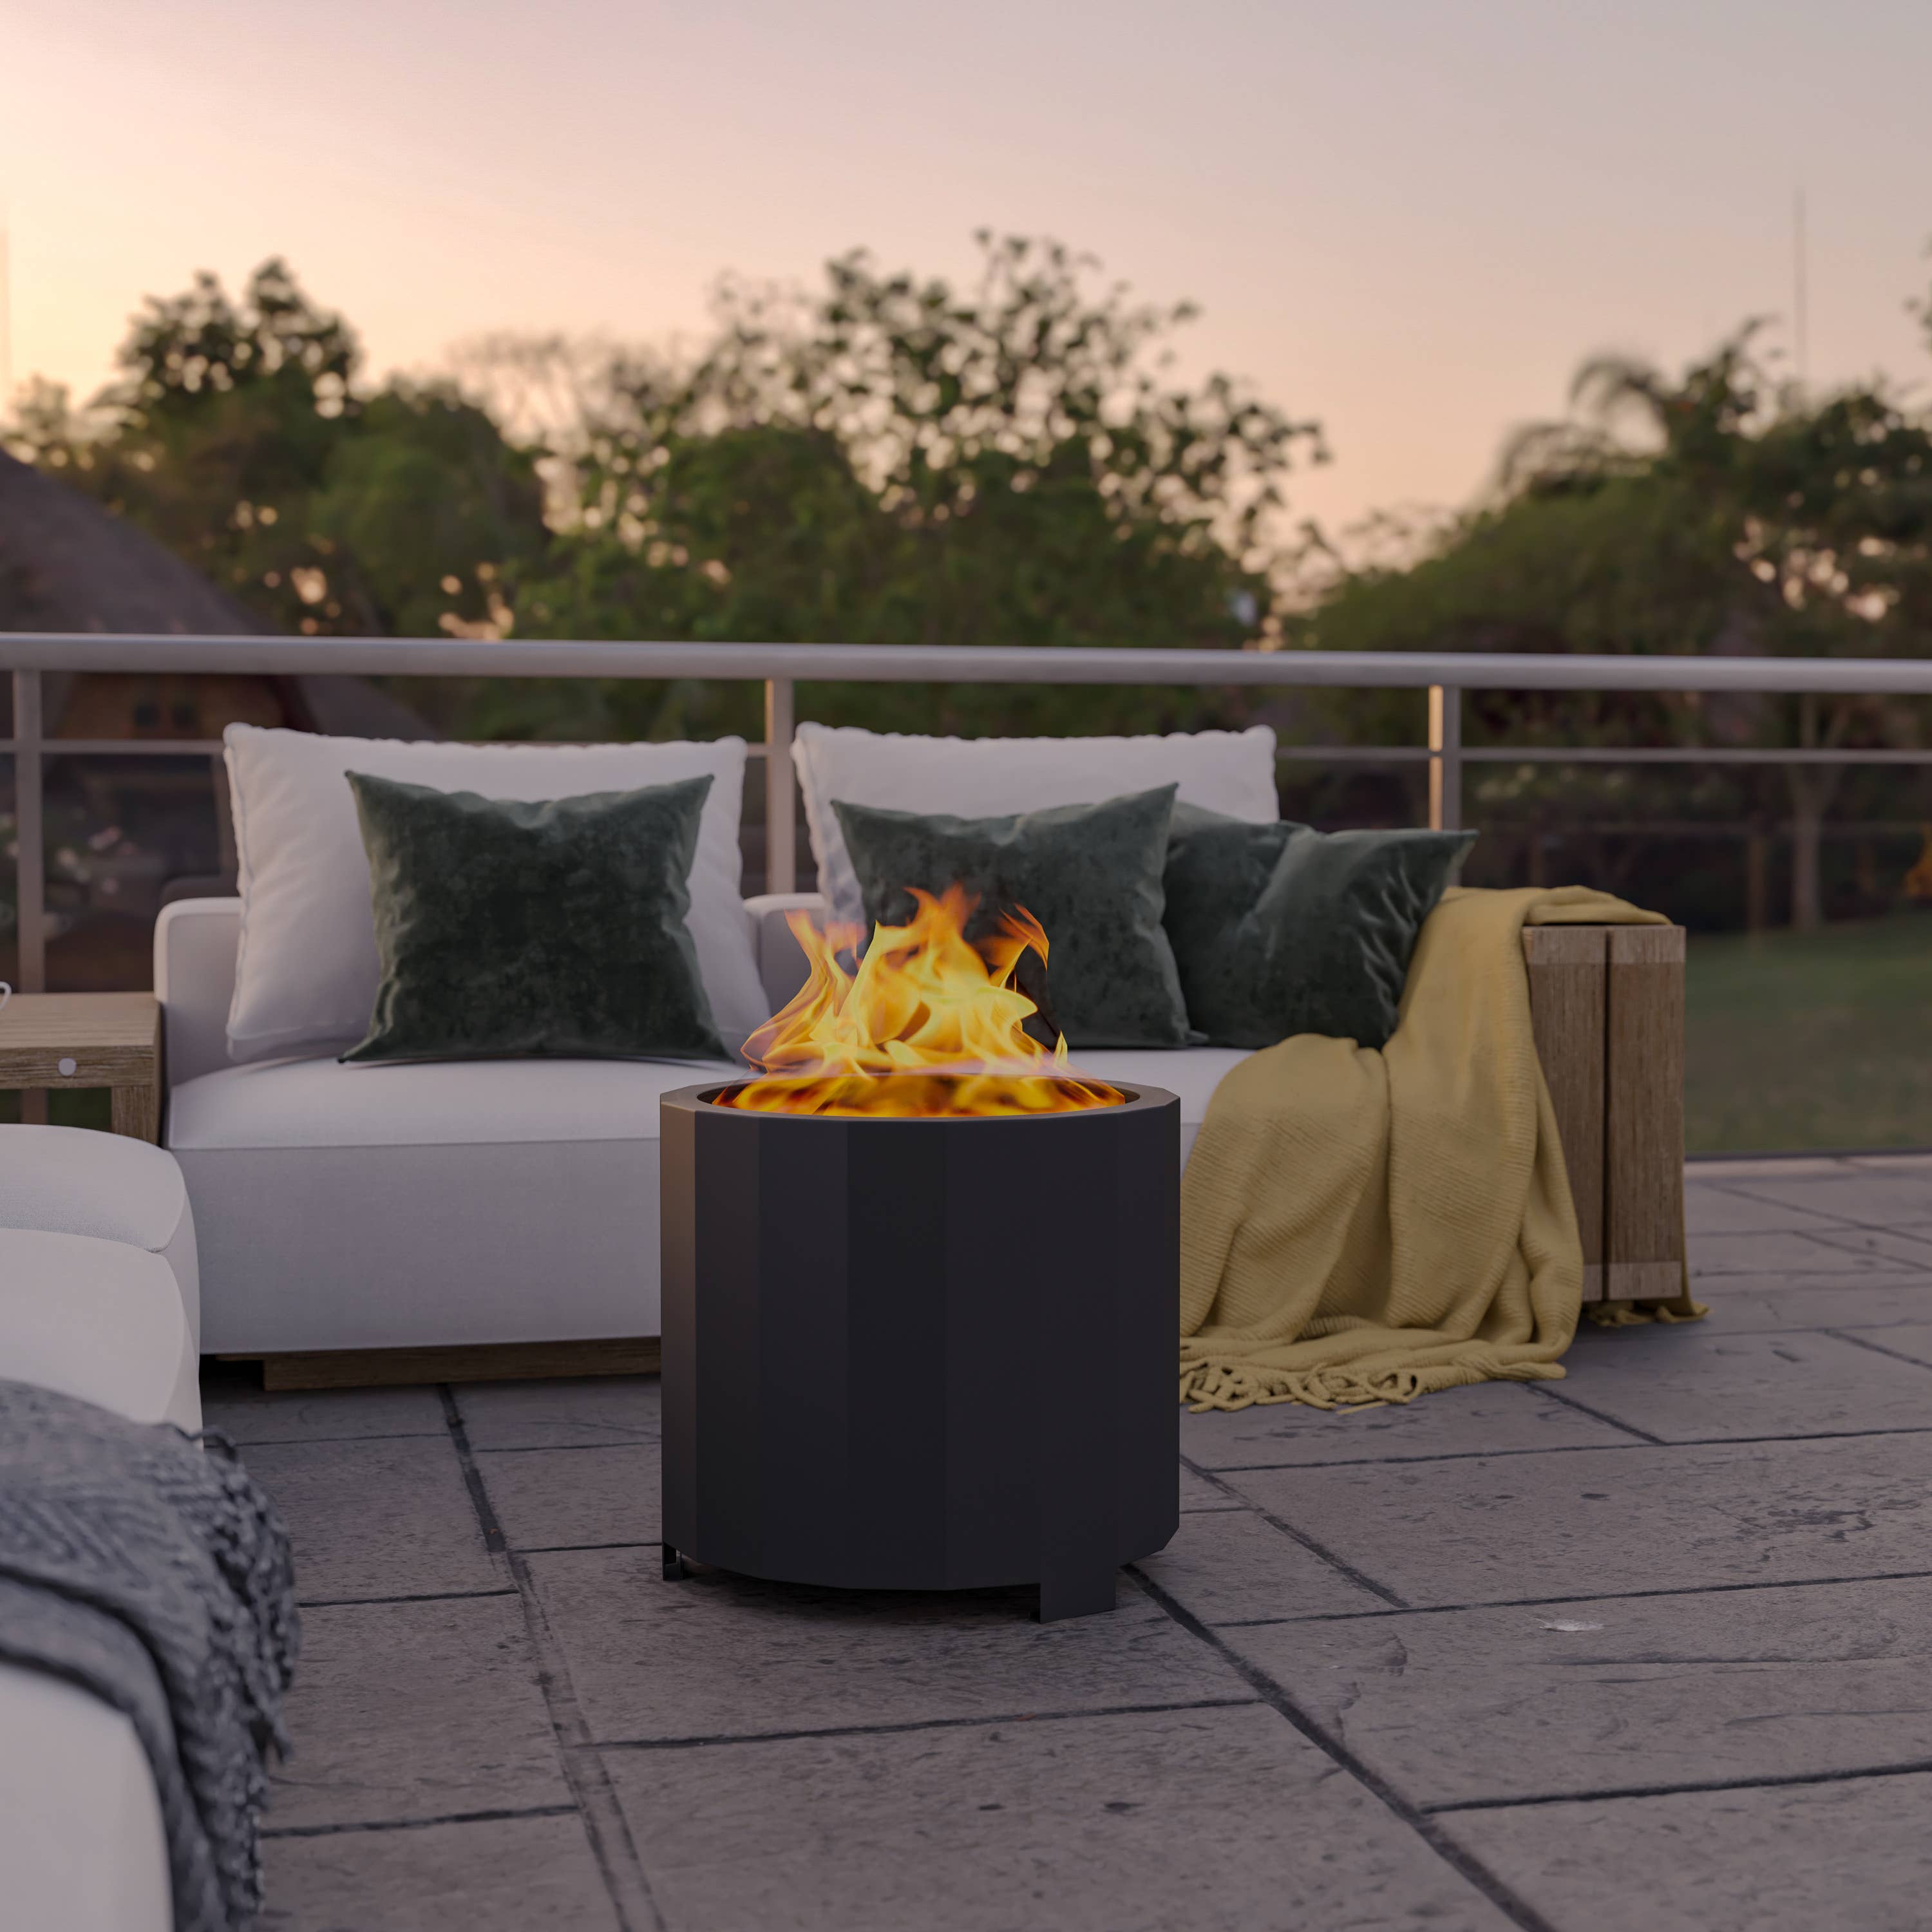 Houswise Tabletop Fire Pit - Concrete Outdoor & Indoor Fire Pit Tabletop,  Smores Maker Kit, Table Top Firepit, Small Portable Mini Indoor Fireplace